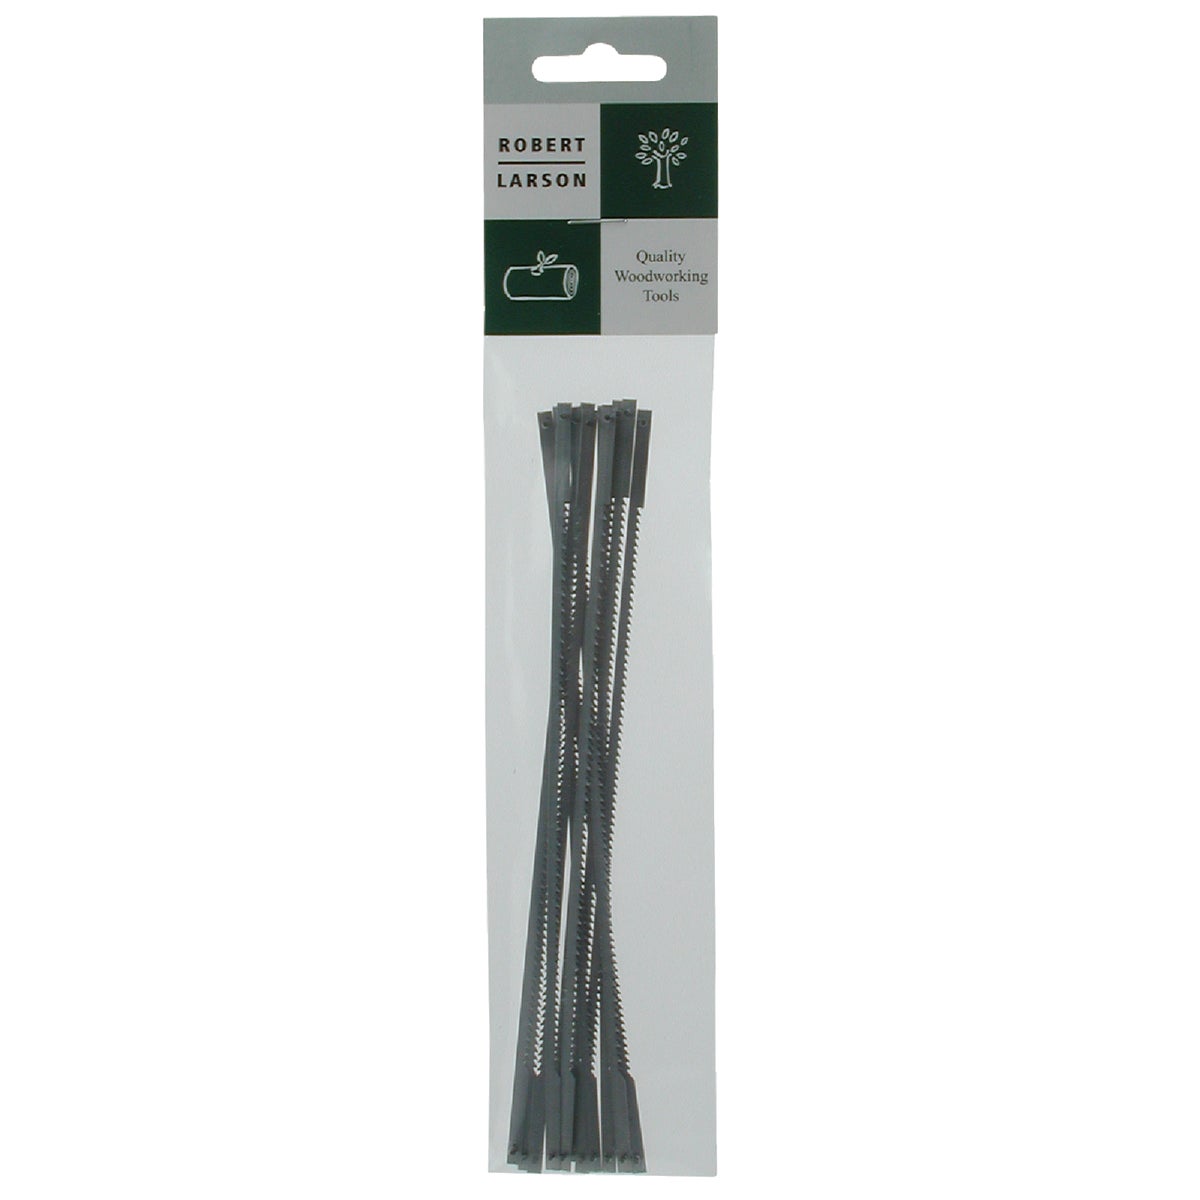 Item 315386, High-quality coping saw blades with pinned ends.